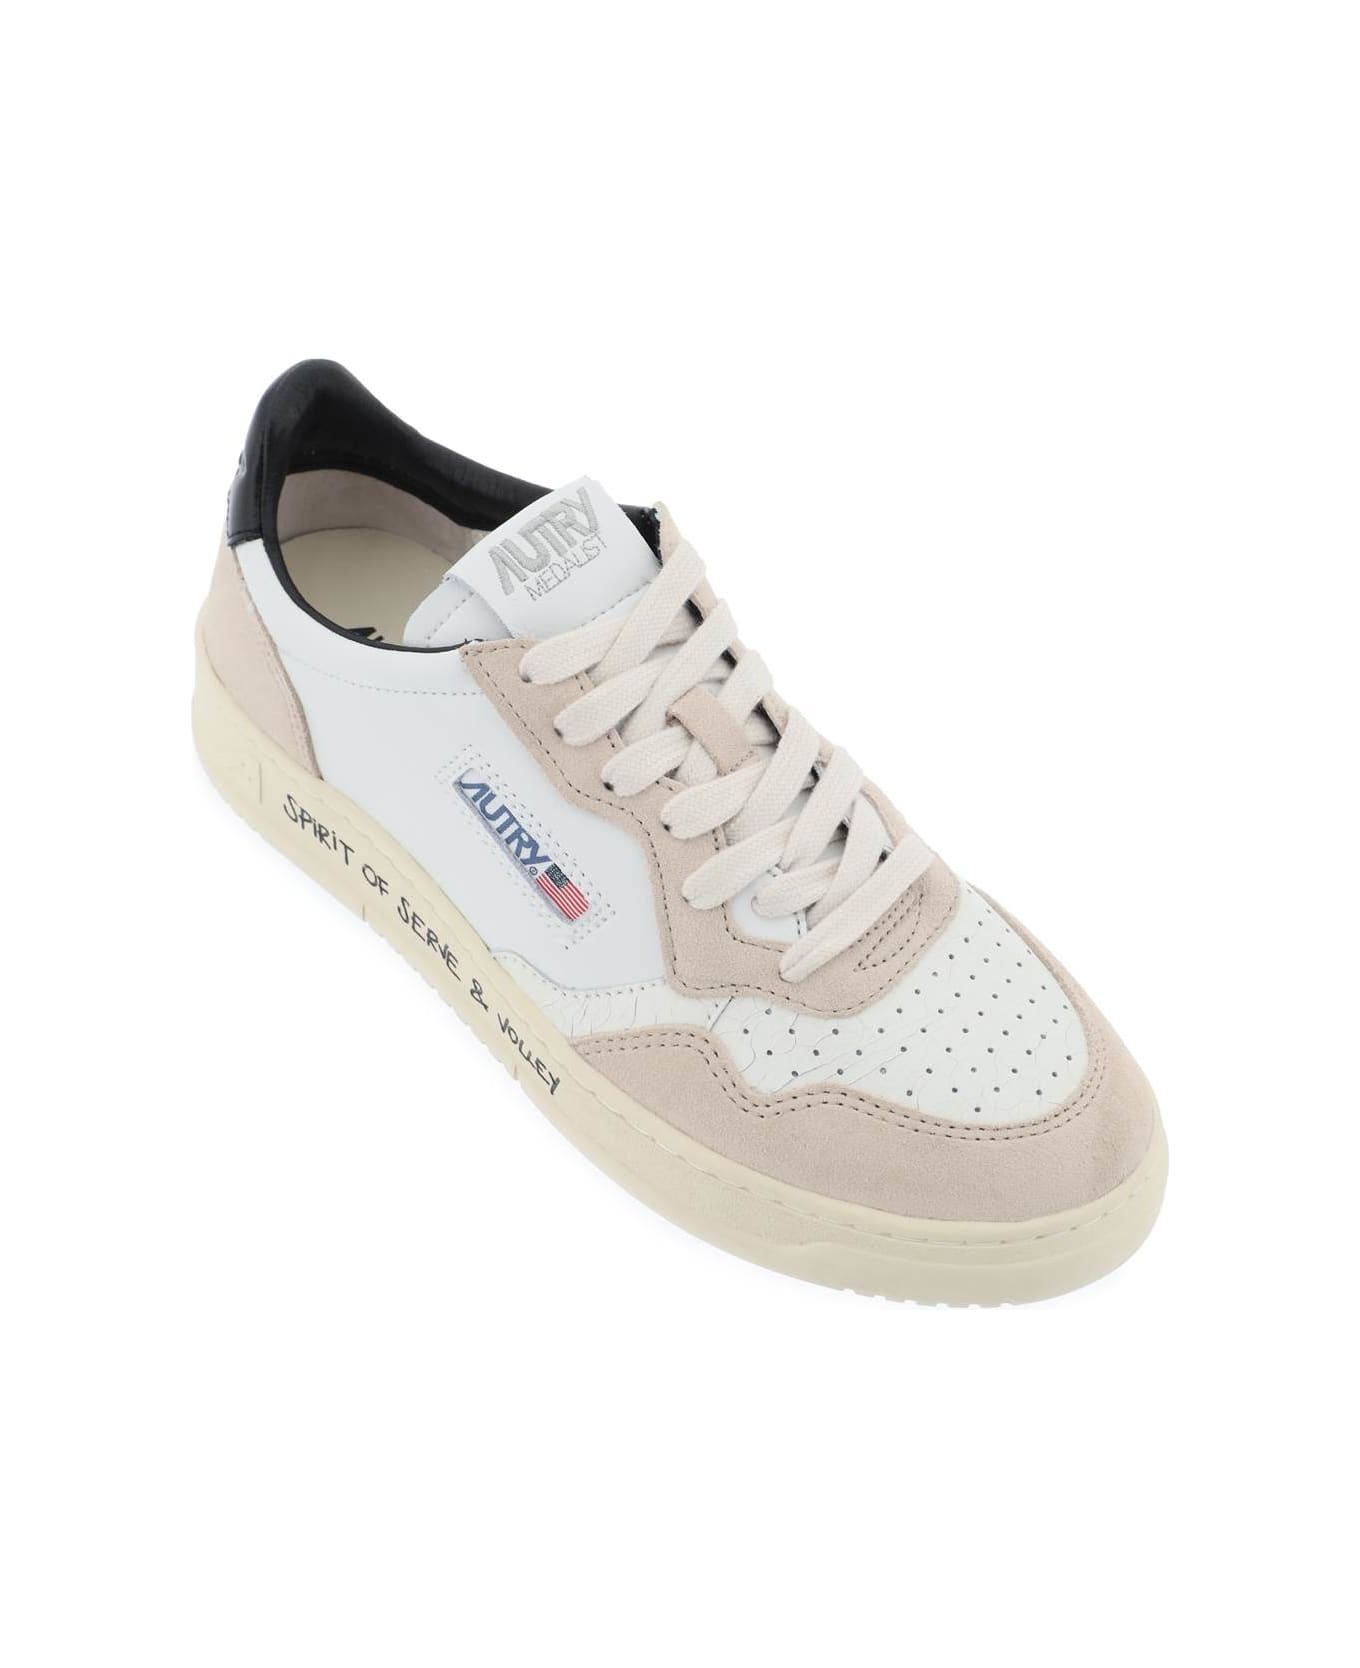 Autry Leather Medalist Low Sneakers - WHT SND BLK (Beige)